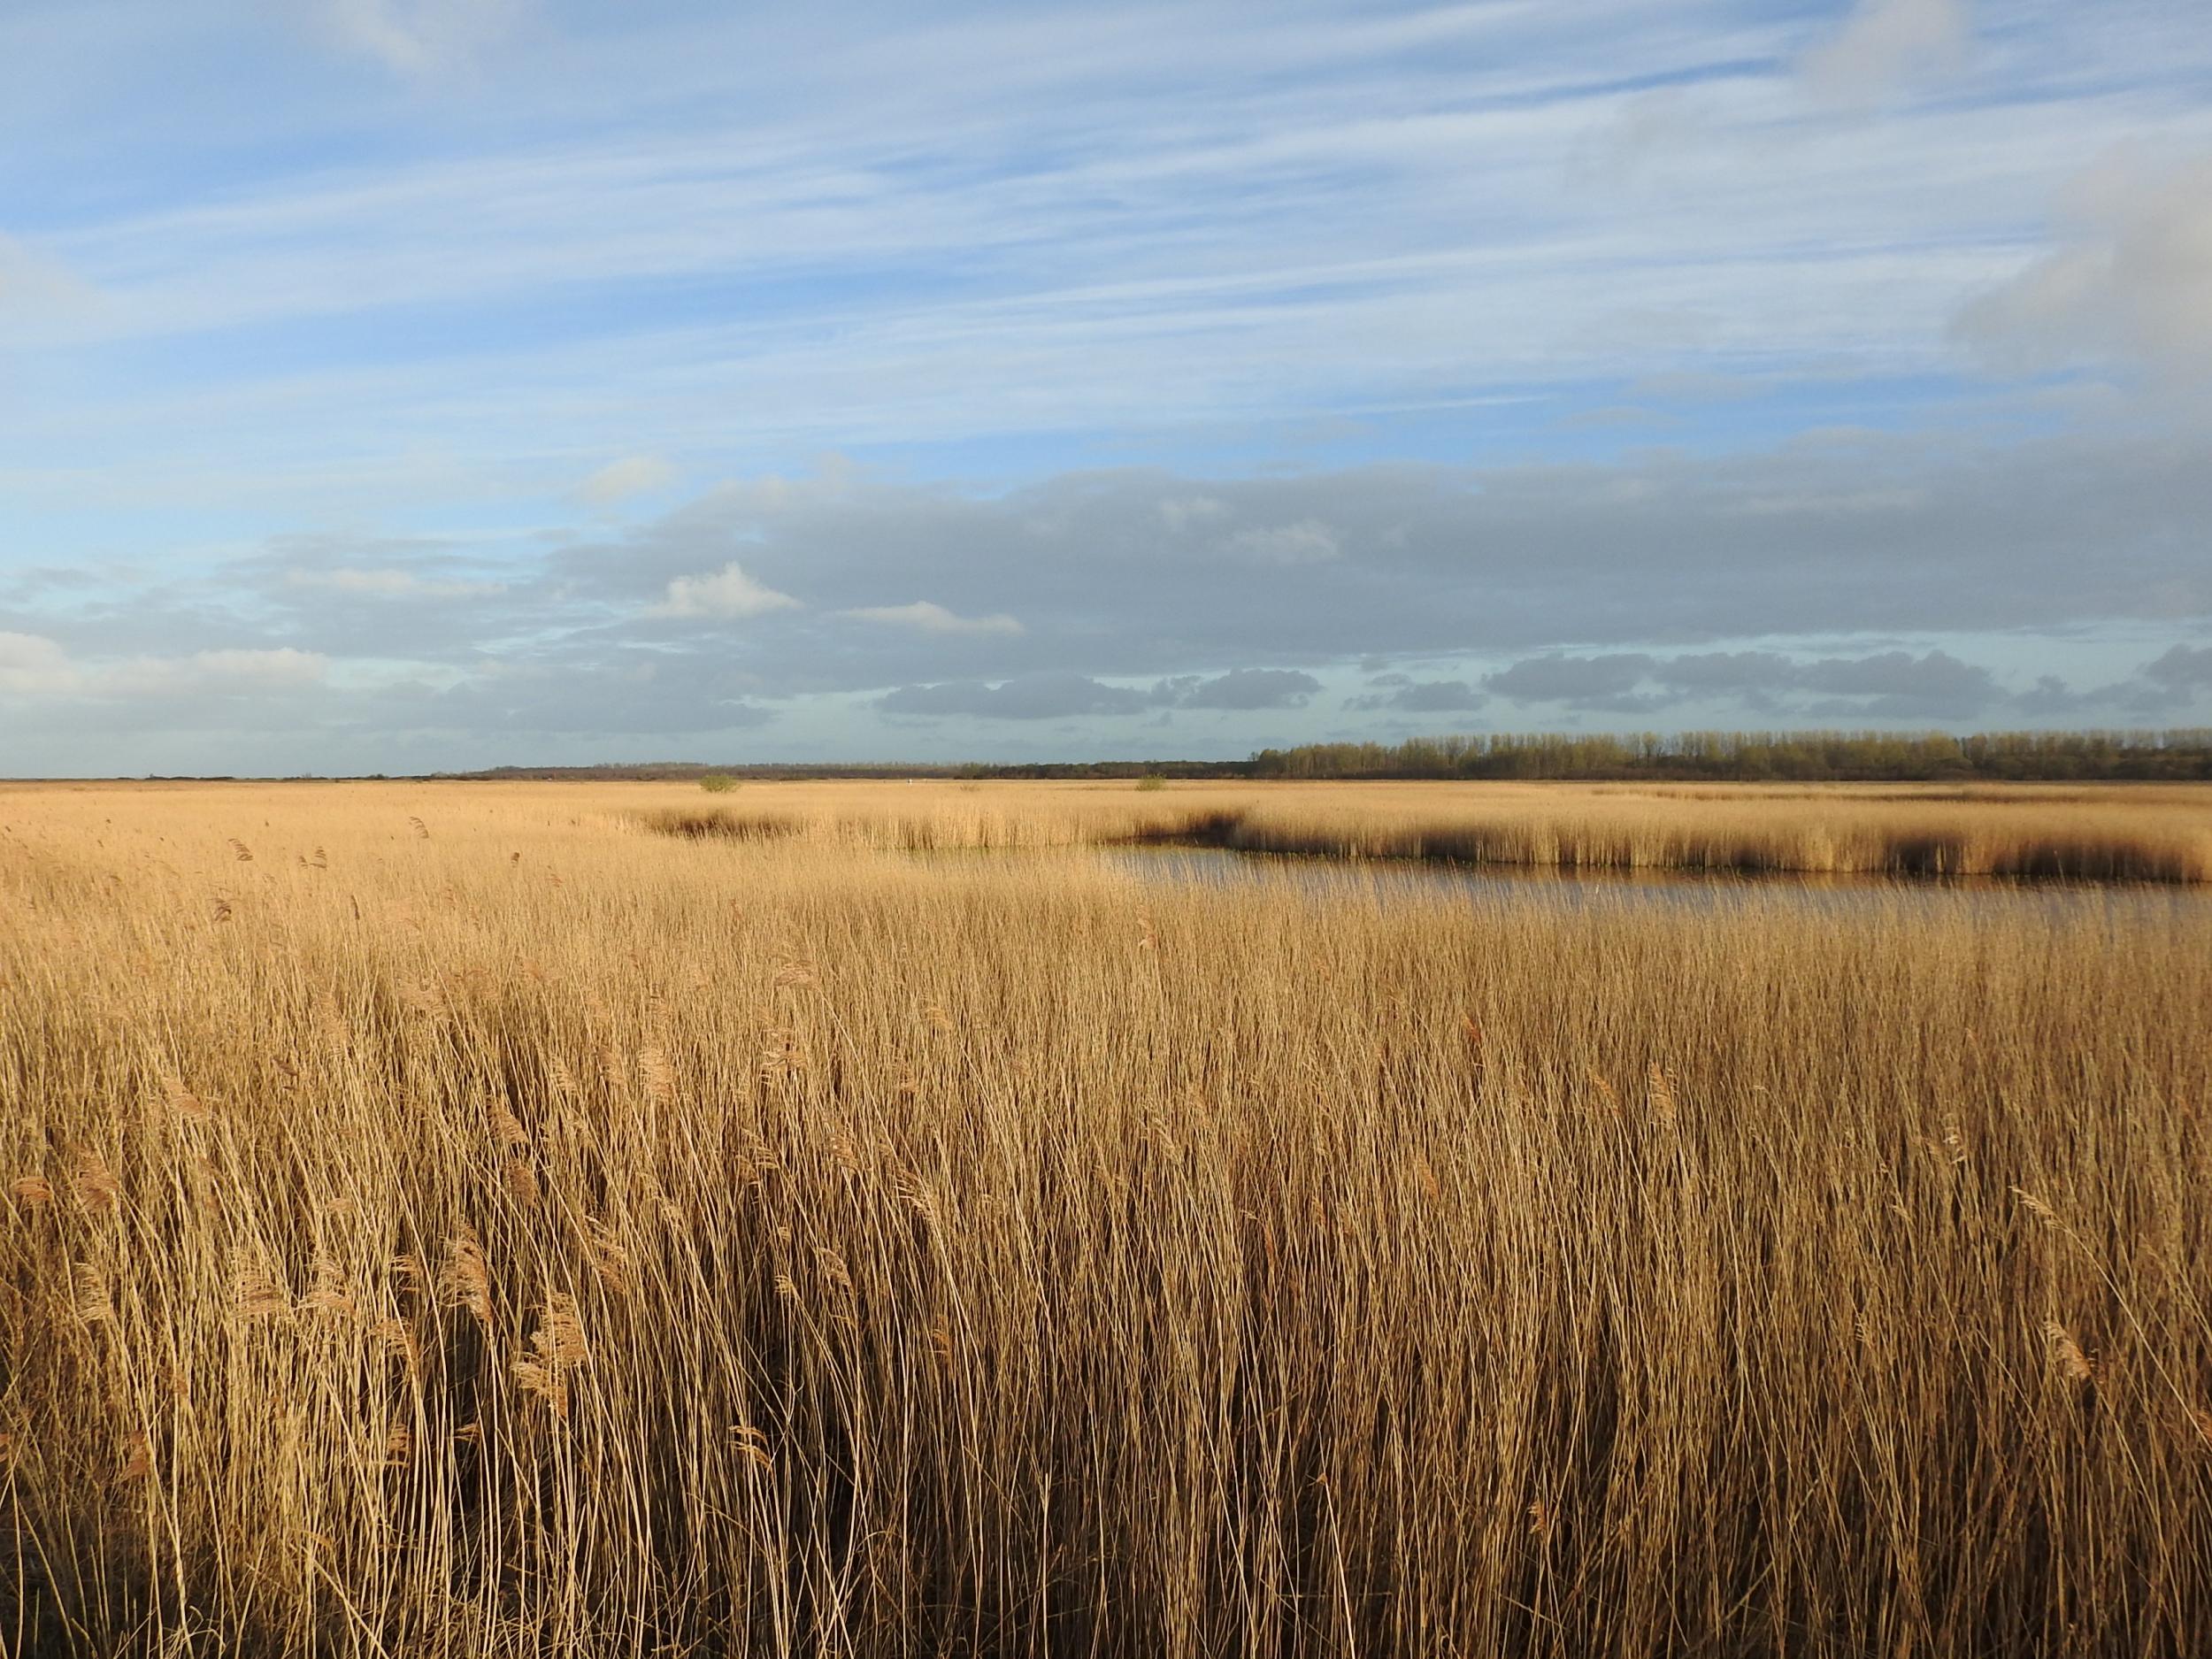 Lauwersmeer is known for its wildlife, as well as its clear skies